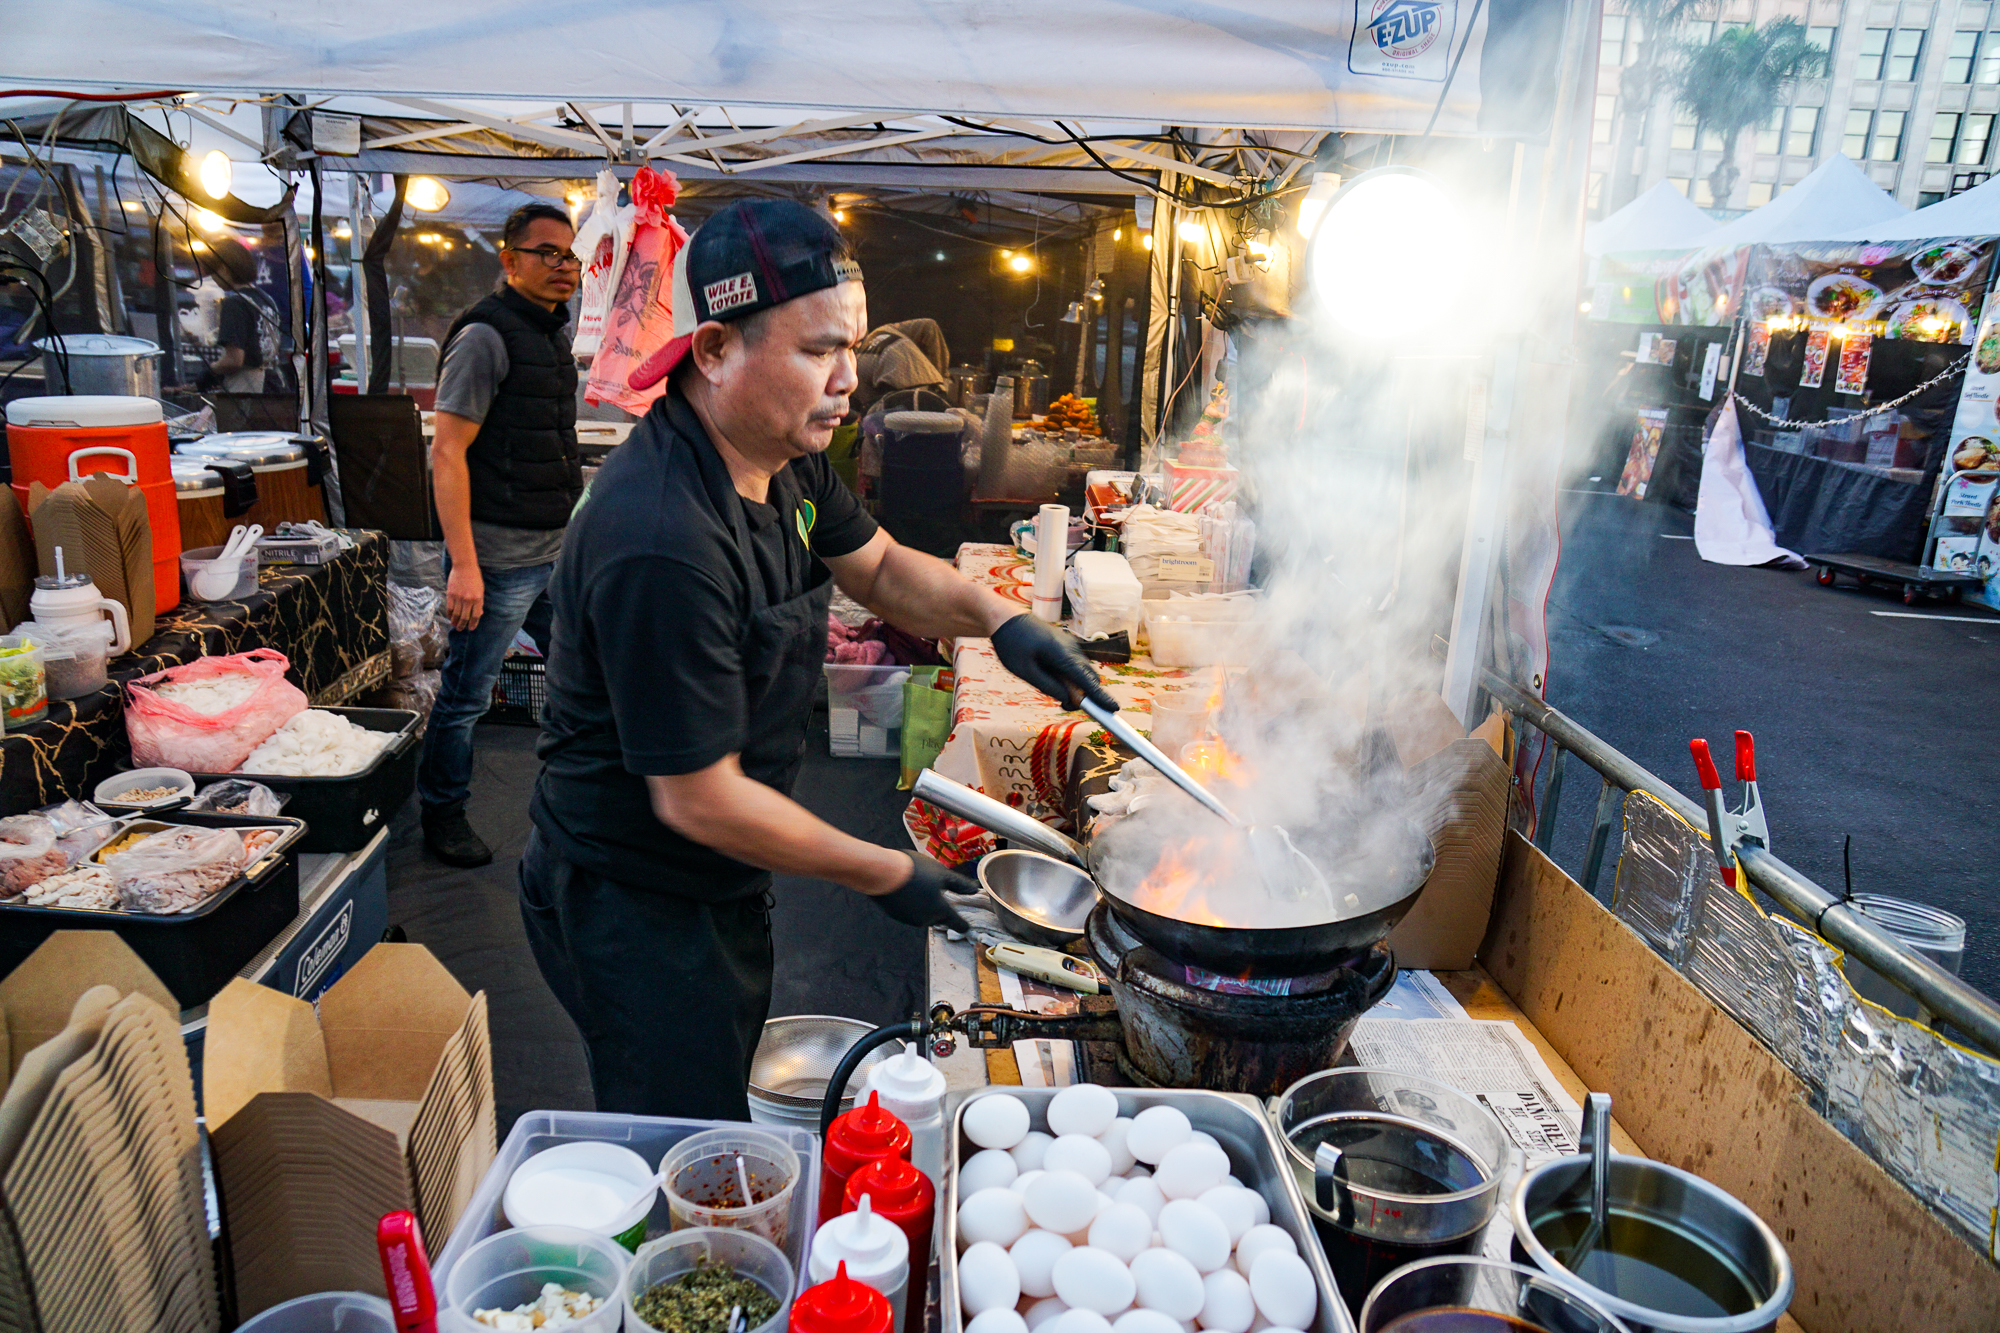 A man wearing a black hat, shirt, and pants in front of a steaming hot wok with a lot of smoke at At Siam.